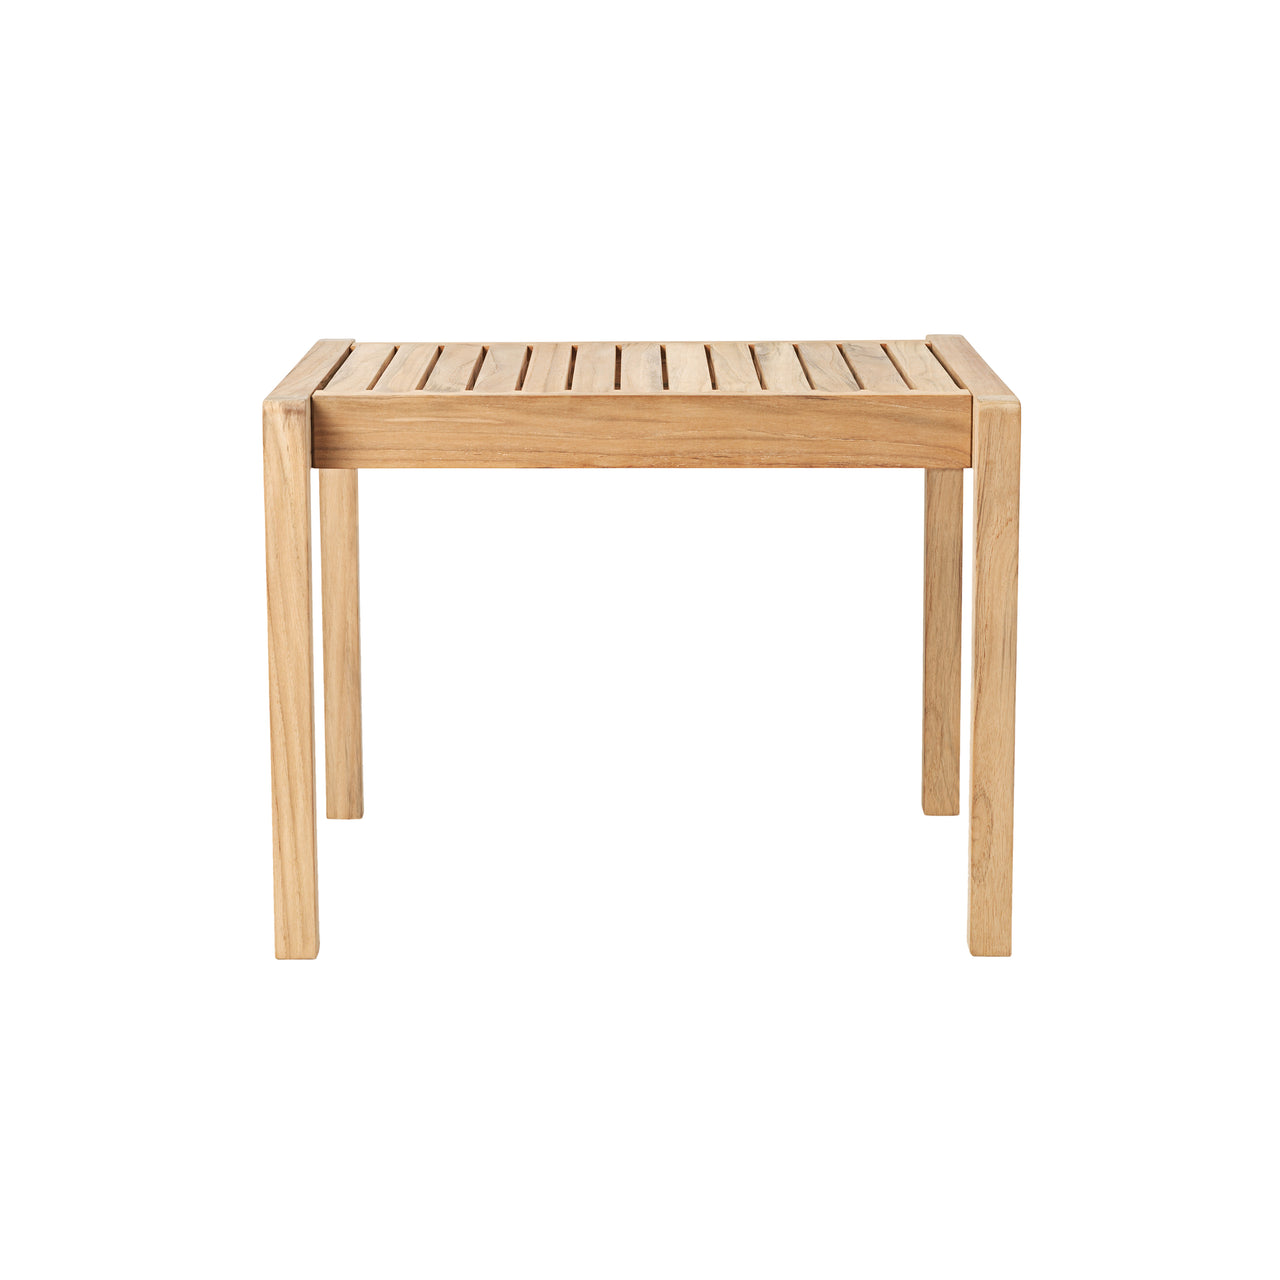 AH911 Outdoor Side Table: Without Cushion